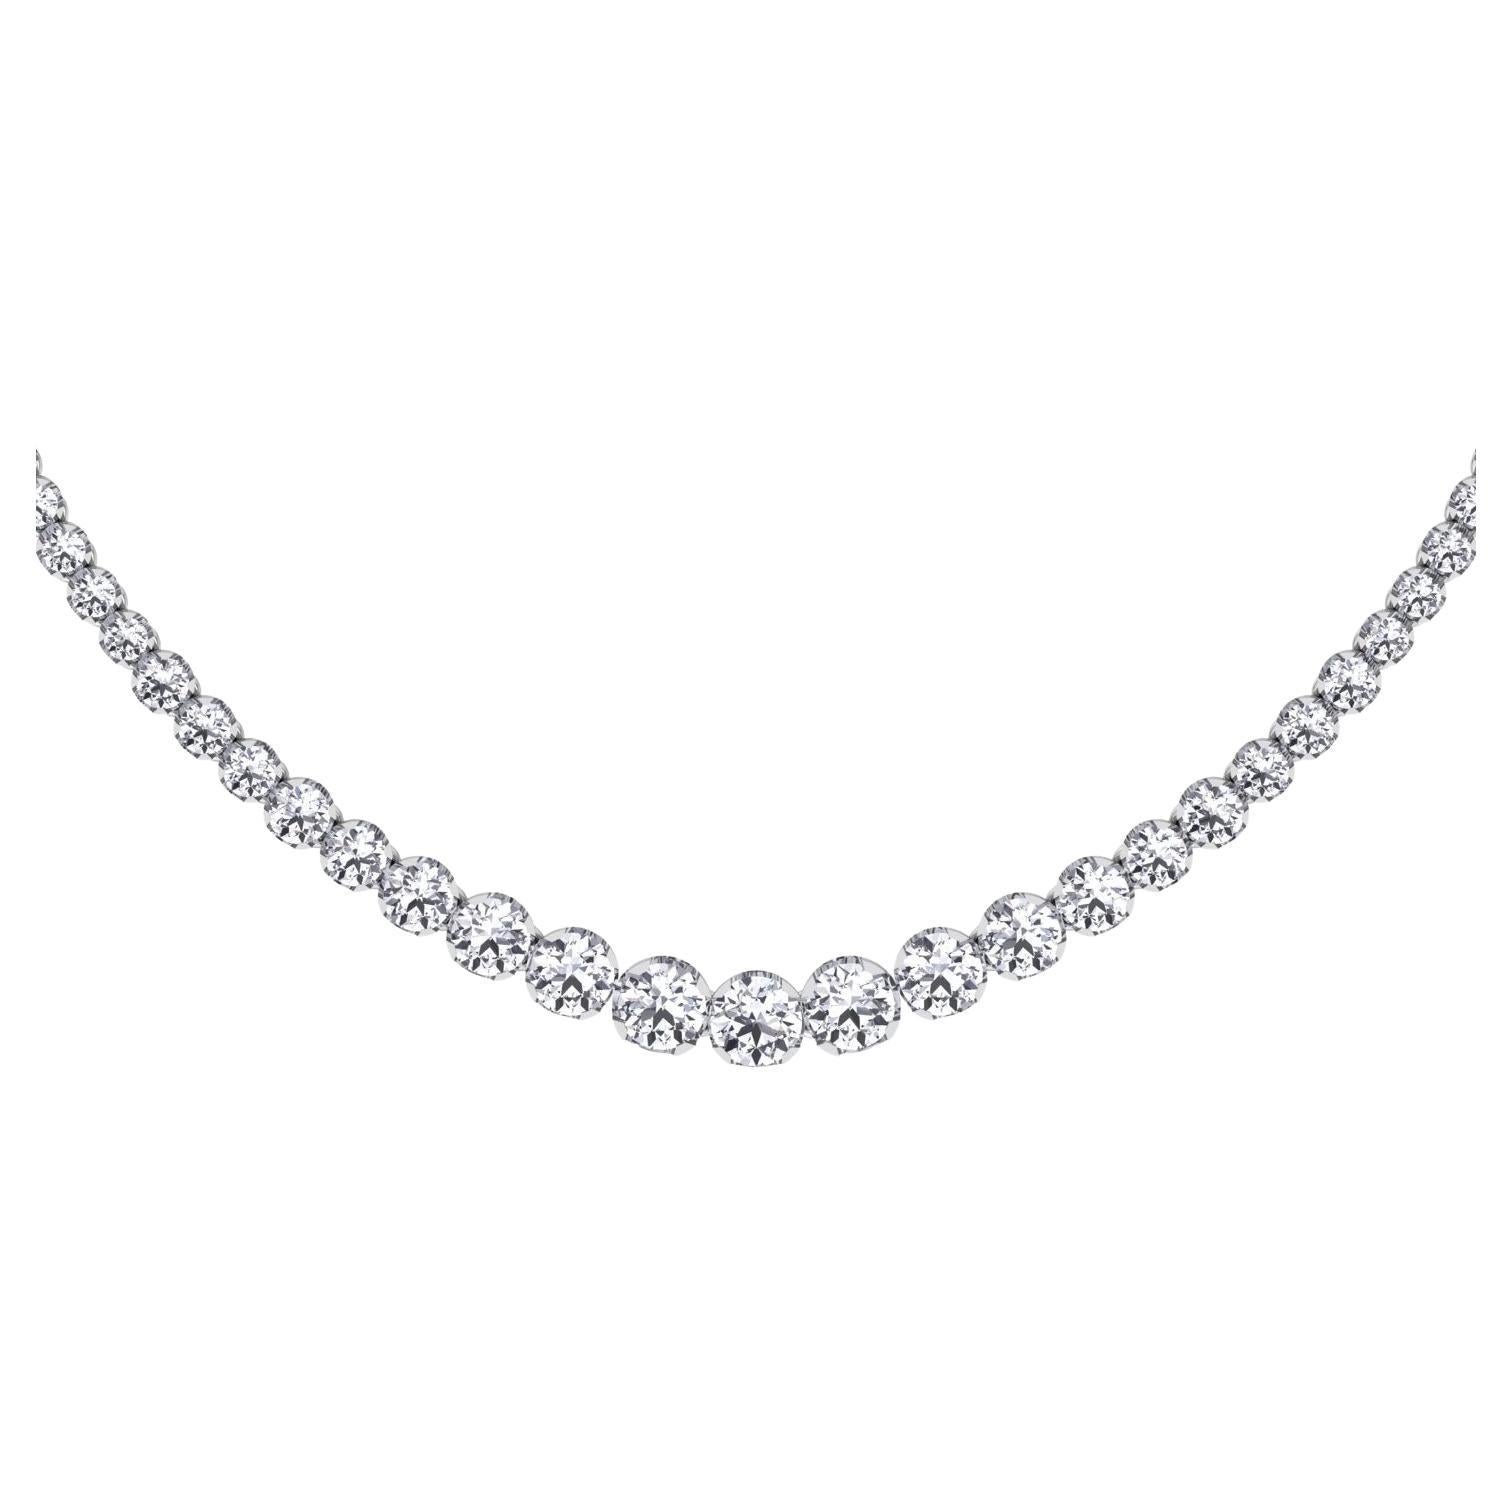 Gem Jewelers Co. 10.23 Carat Graduated Diamond Tennis Necklace in 14K White Gold For Sale